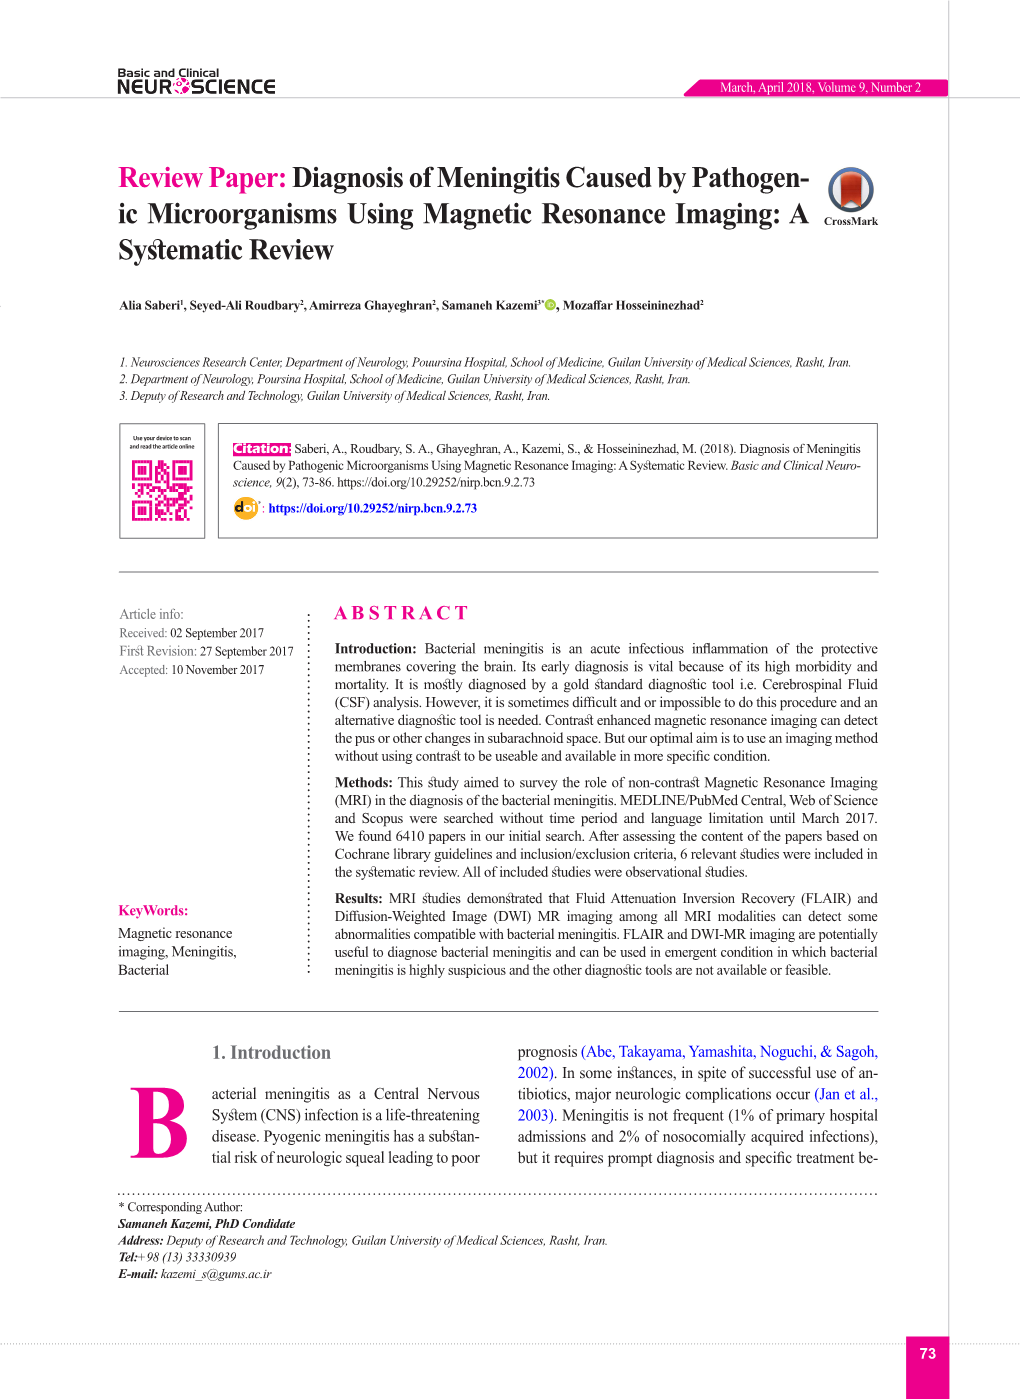 Diagnosis of Meningitis Caused by Pathogenic Microorganisms Using Magnetic Resonance Imaging: a Systematic Review.Basic and Clinical Neuro- Science, 9(2), 73-86